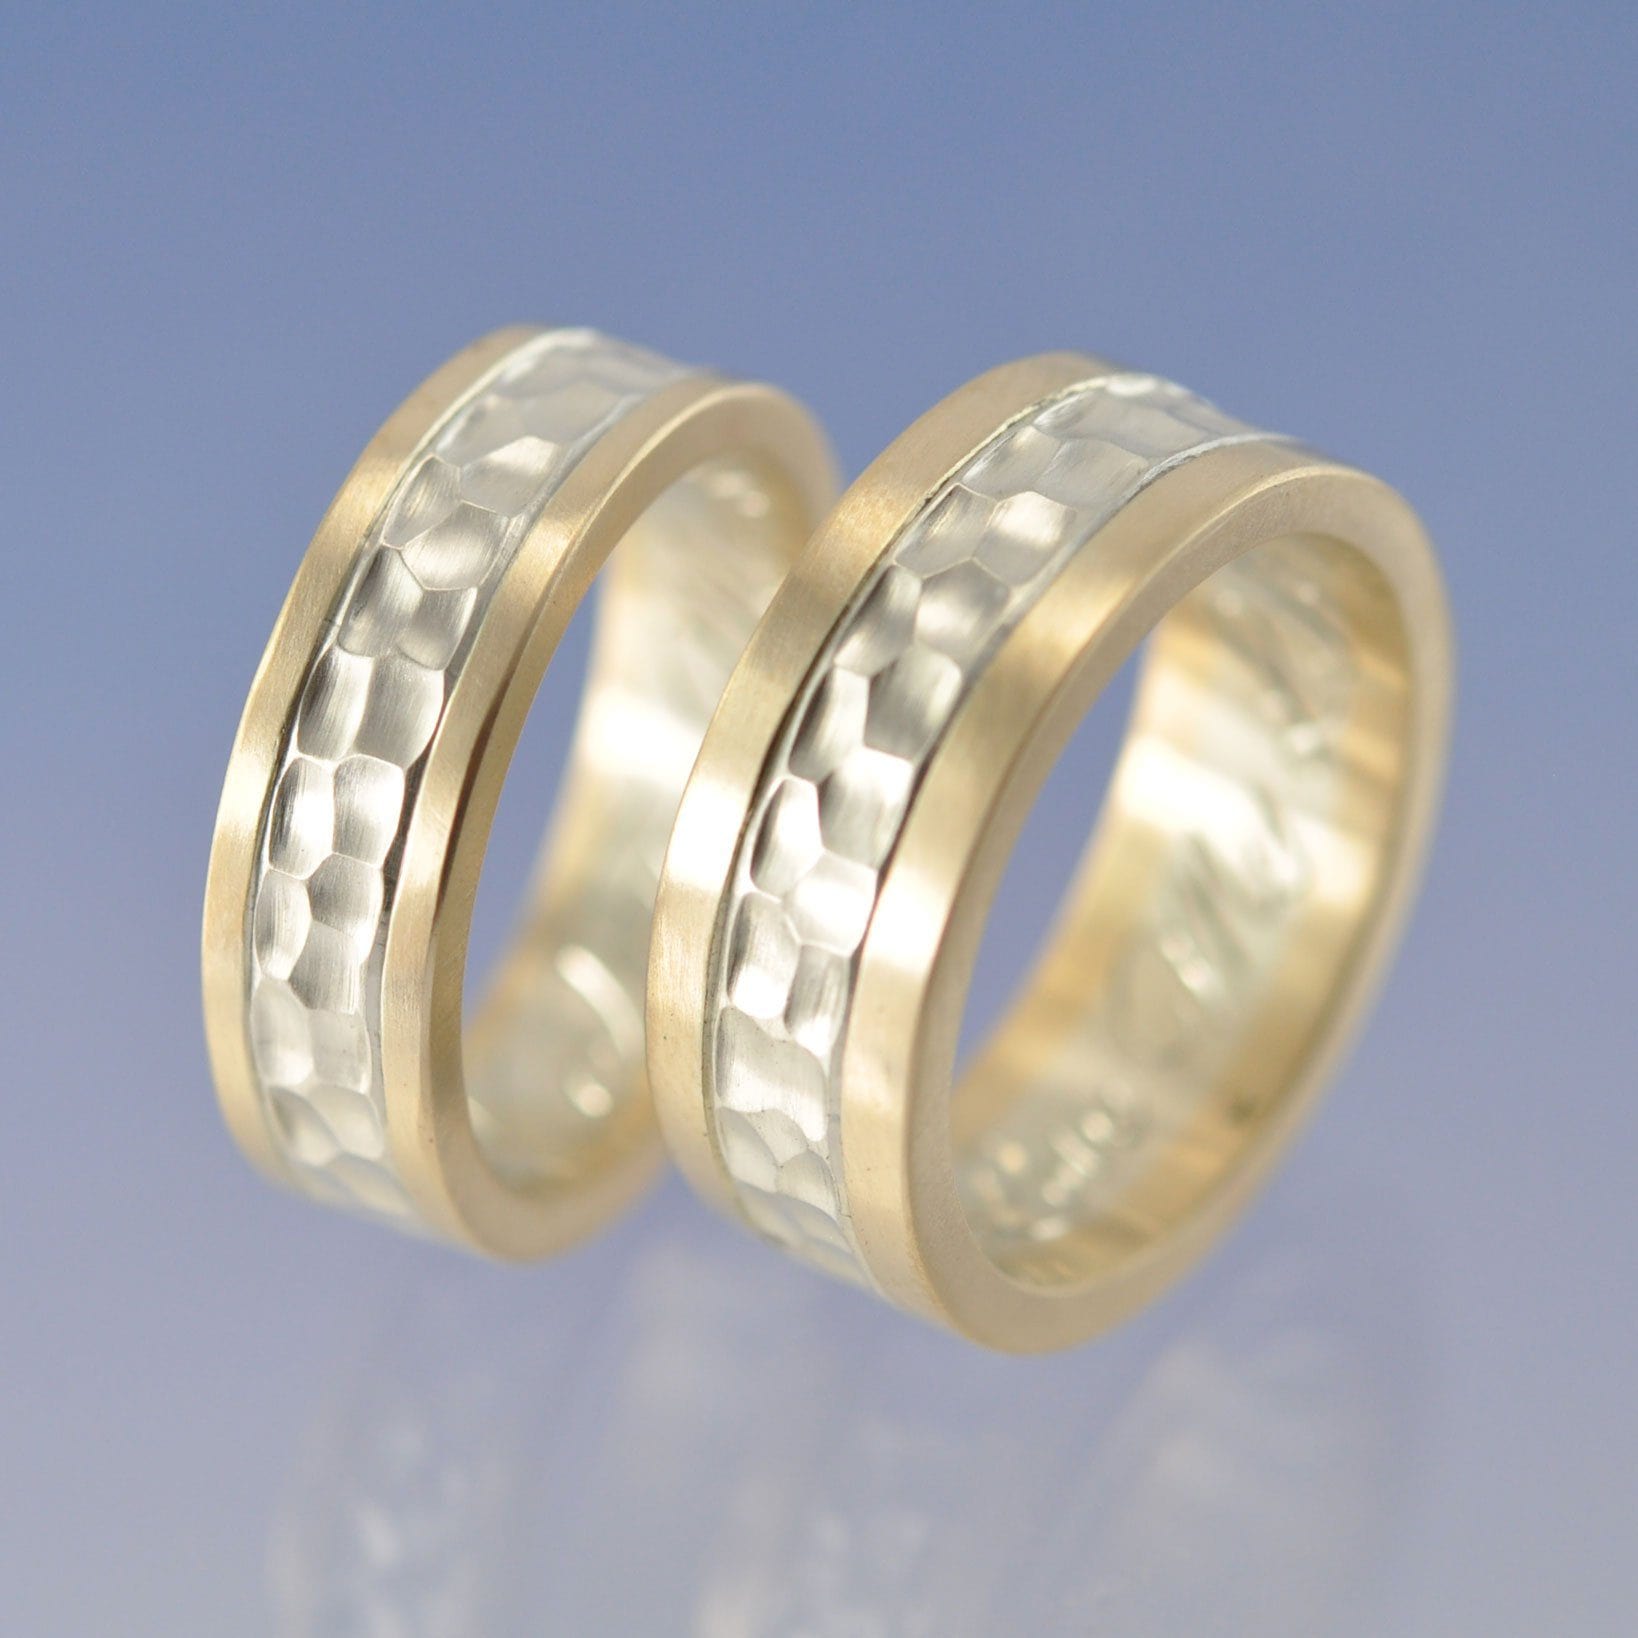 Cremation Ashes Ring. Two-Tone with Hammered Section Ring by Chris Parry Jewellery